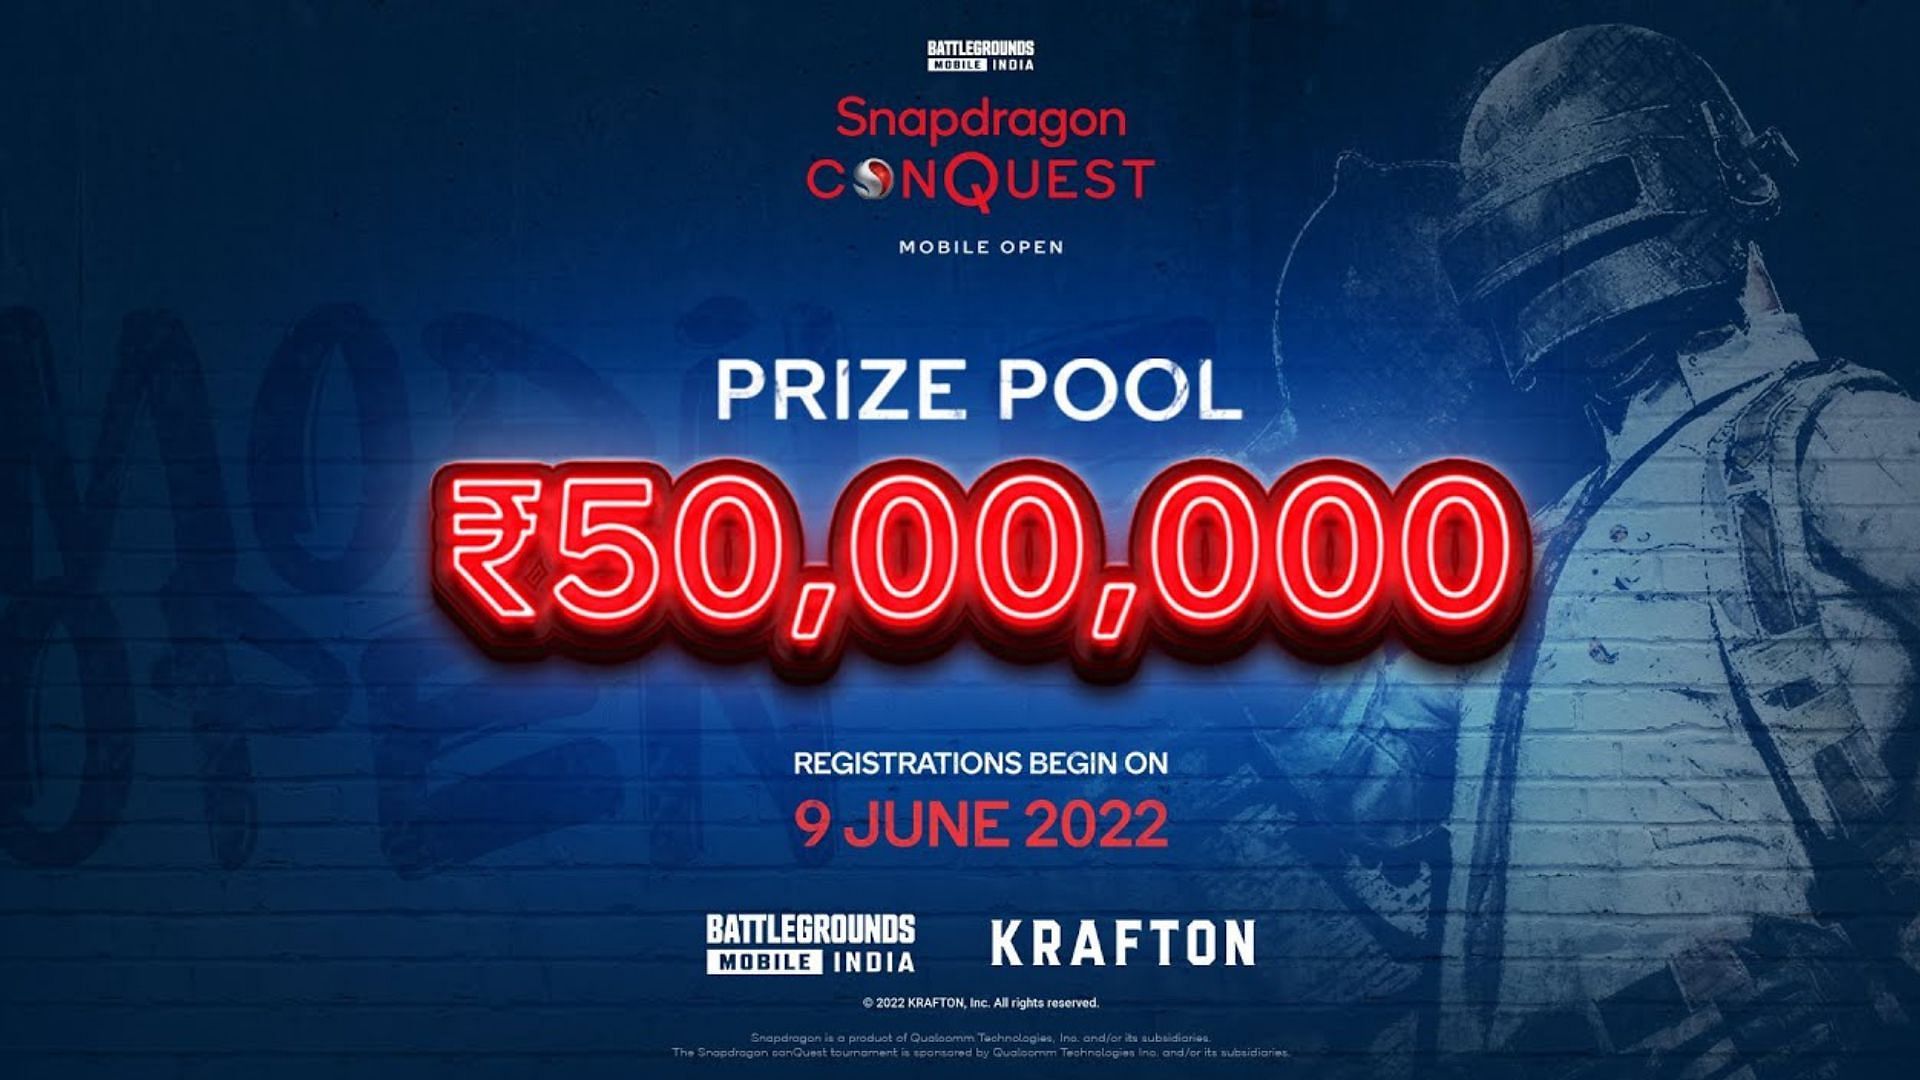 BGMI Qualcomm Snapdragon Mobile Open features a massive prize pool of 50 lakhs INR (Image via Snapdragon)